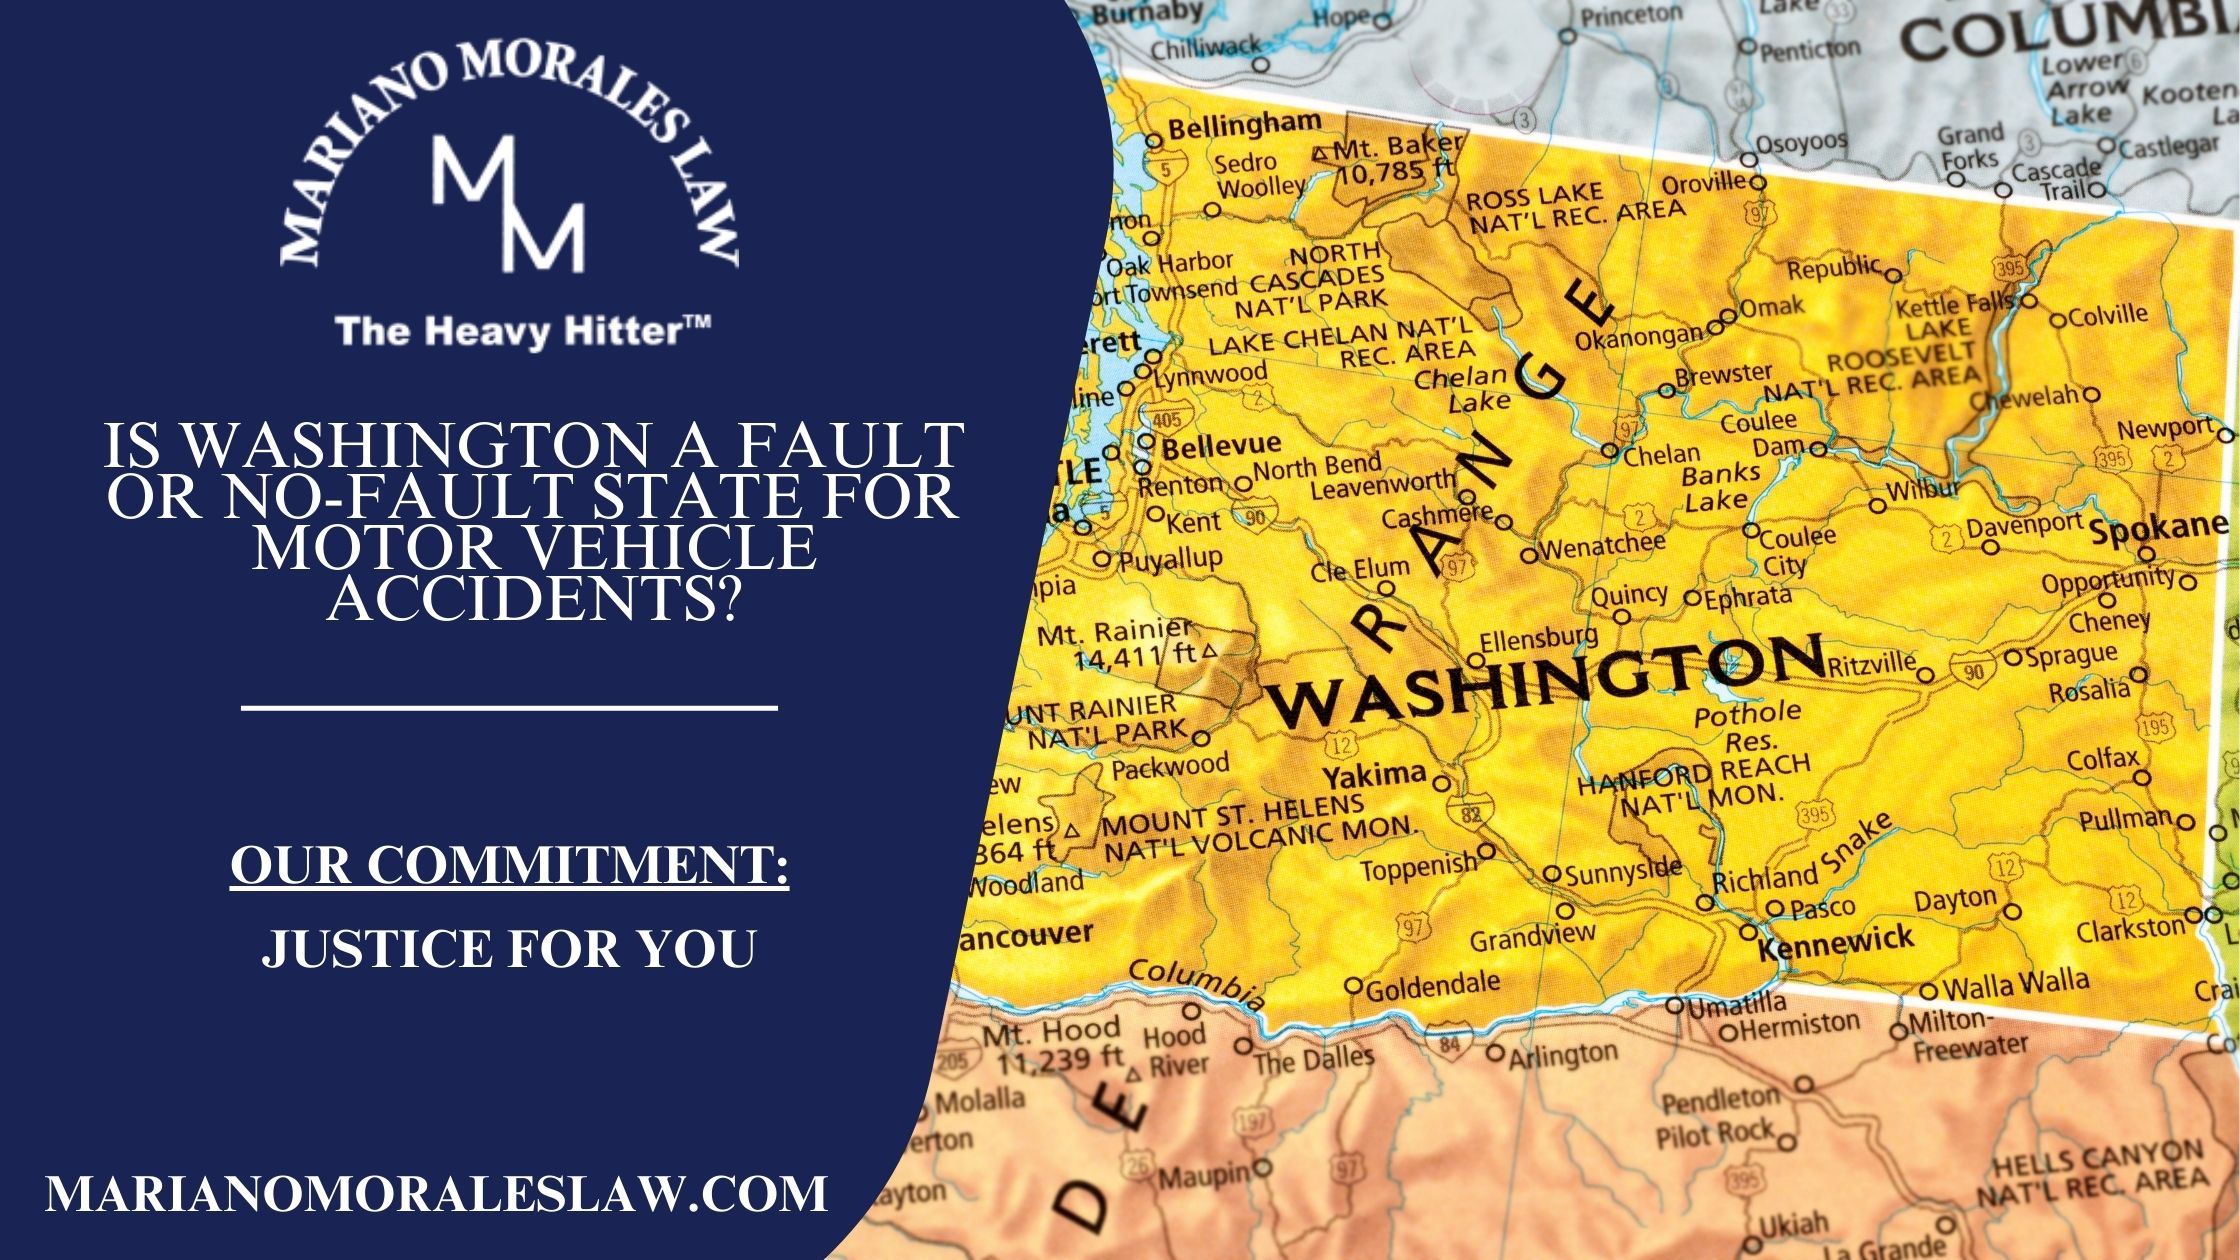 Image featuring the question 'Is Washington a Fault or No-Fault State?' with a map of Washington State in the background. The image includes branding for Mariano Morales Law and highlights their commitment to providing justice in motor vehicle accident cases.